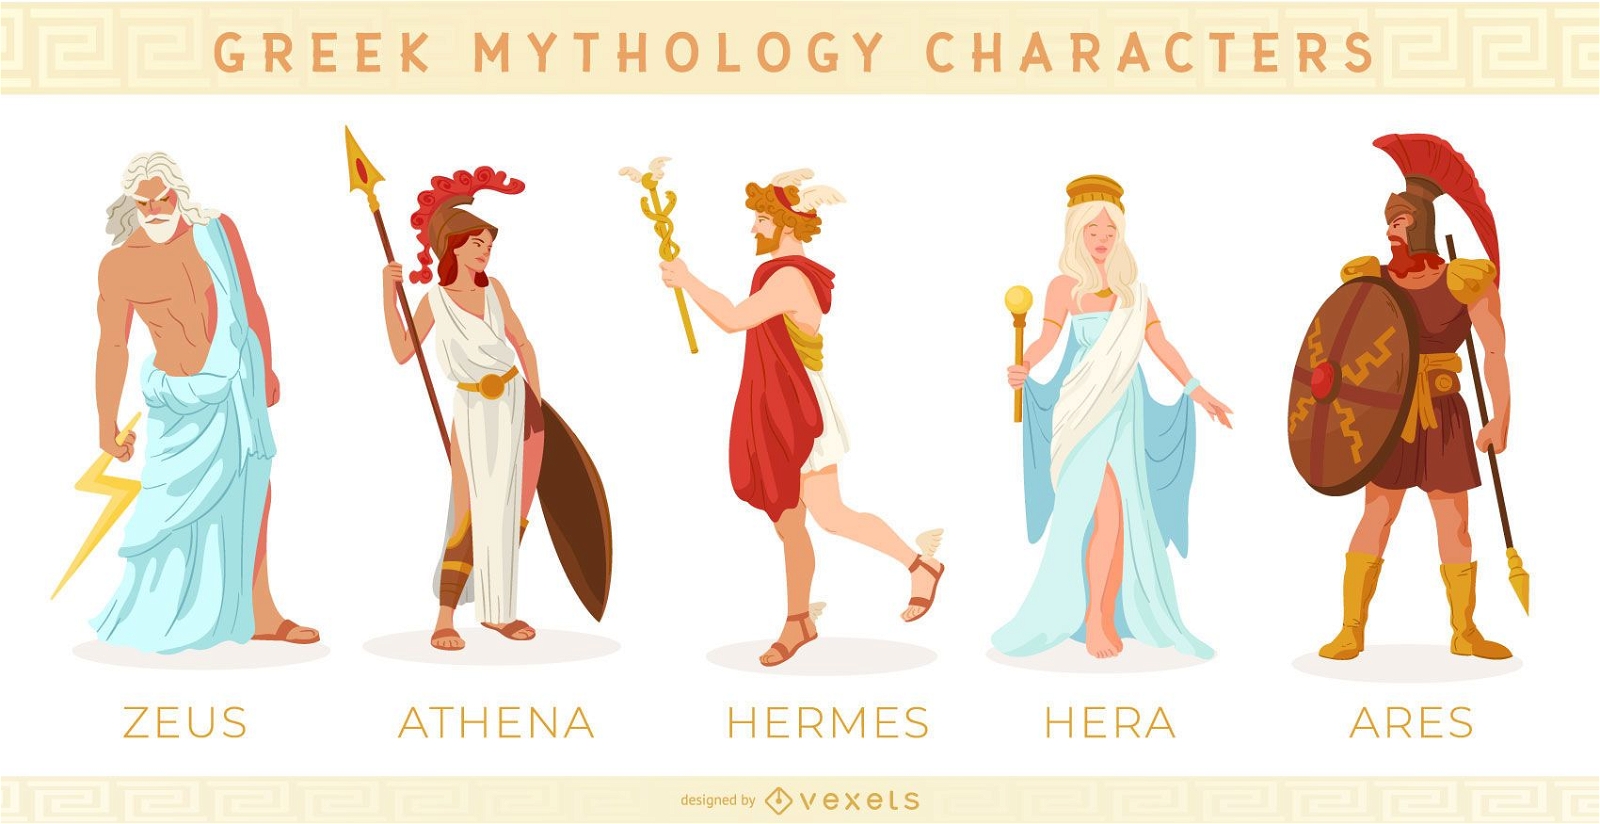  A vector illustration of five Greek gods: Zeus, Athena, Hermes, Hera, and Ares.